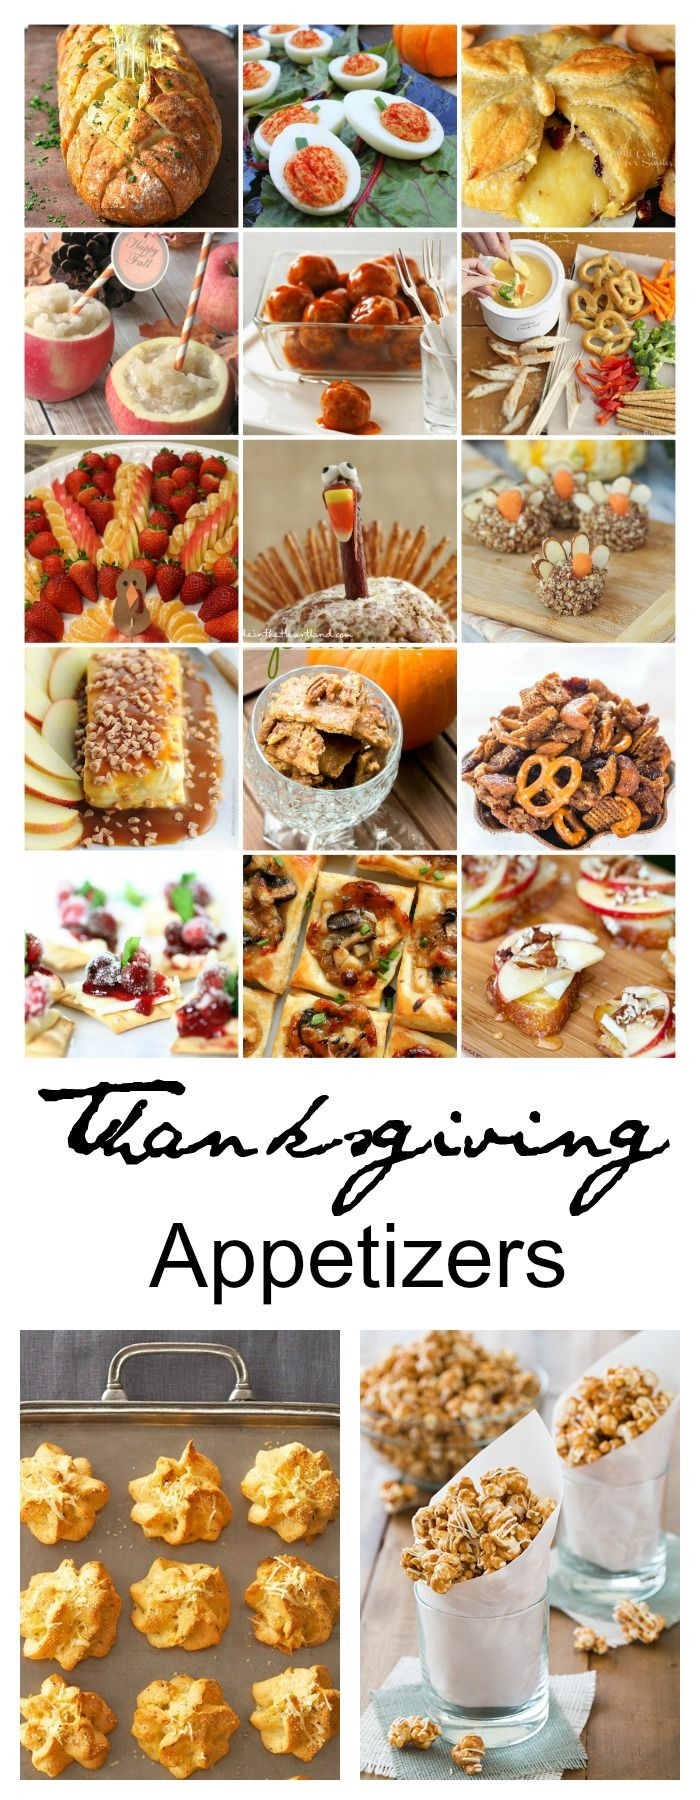 Traditional Thanksgiving Appetizers
 25 best ideas about Thanksgiving appetizers on Pinterest